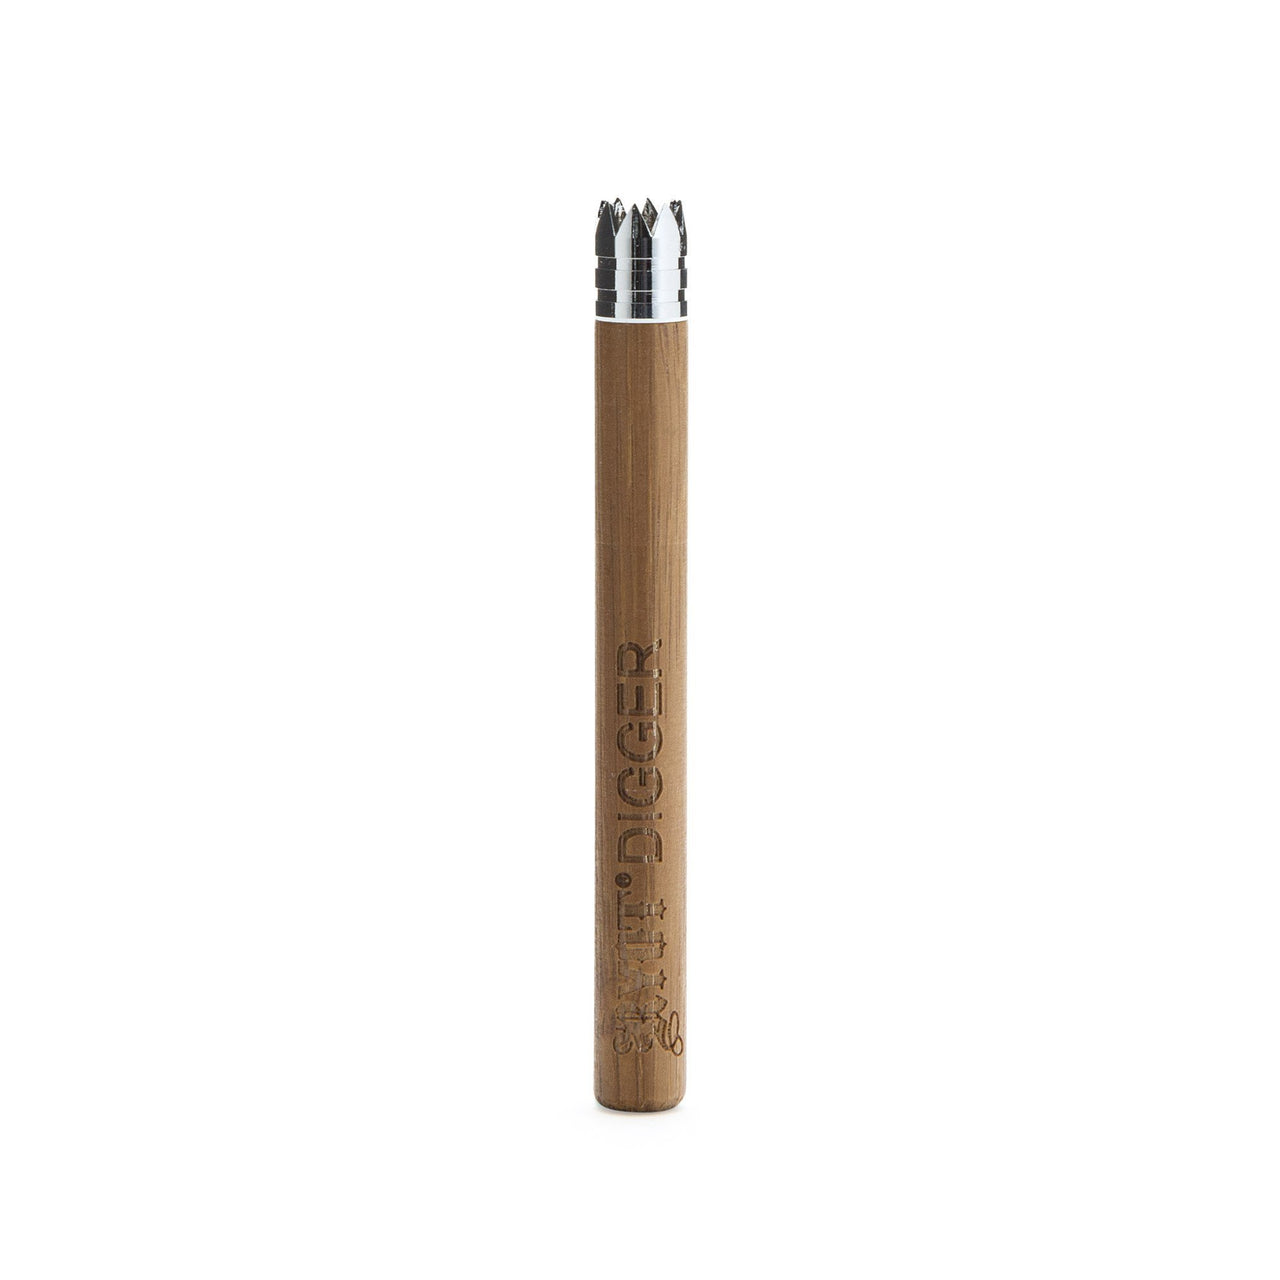 RYOT Wooden One Hitter Bat with Digger Tip - Bamboo